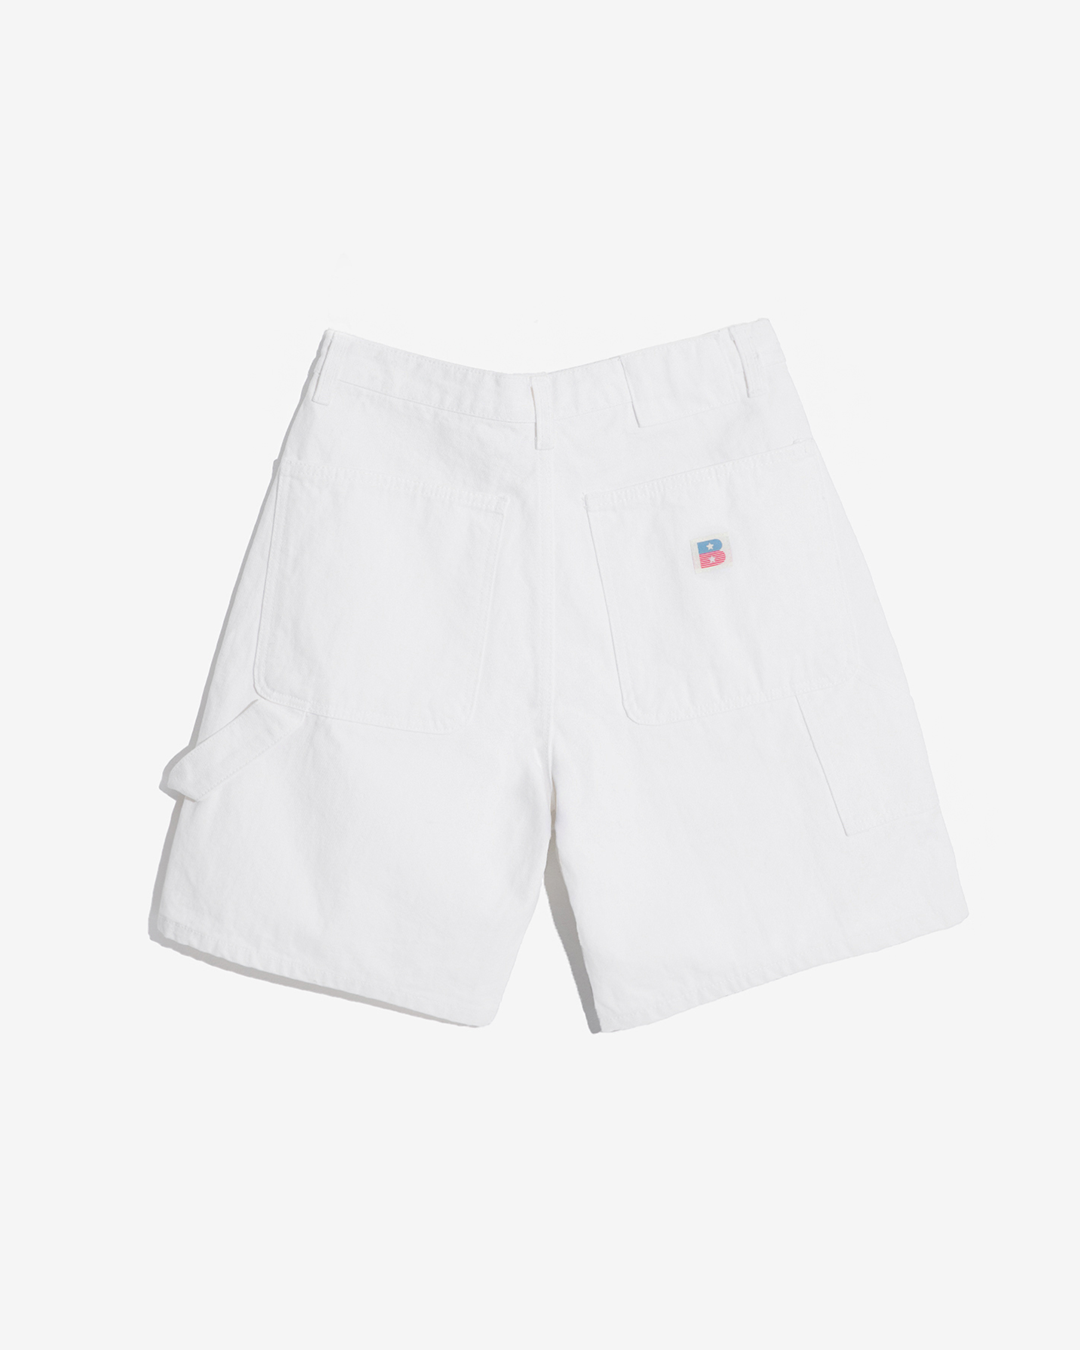 THE GRATEFUL CAMP PAINTER SHORTS (WHITE)